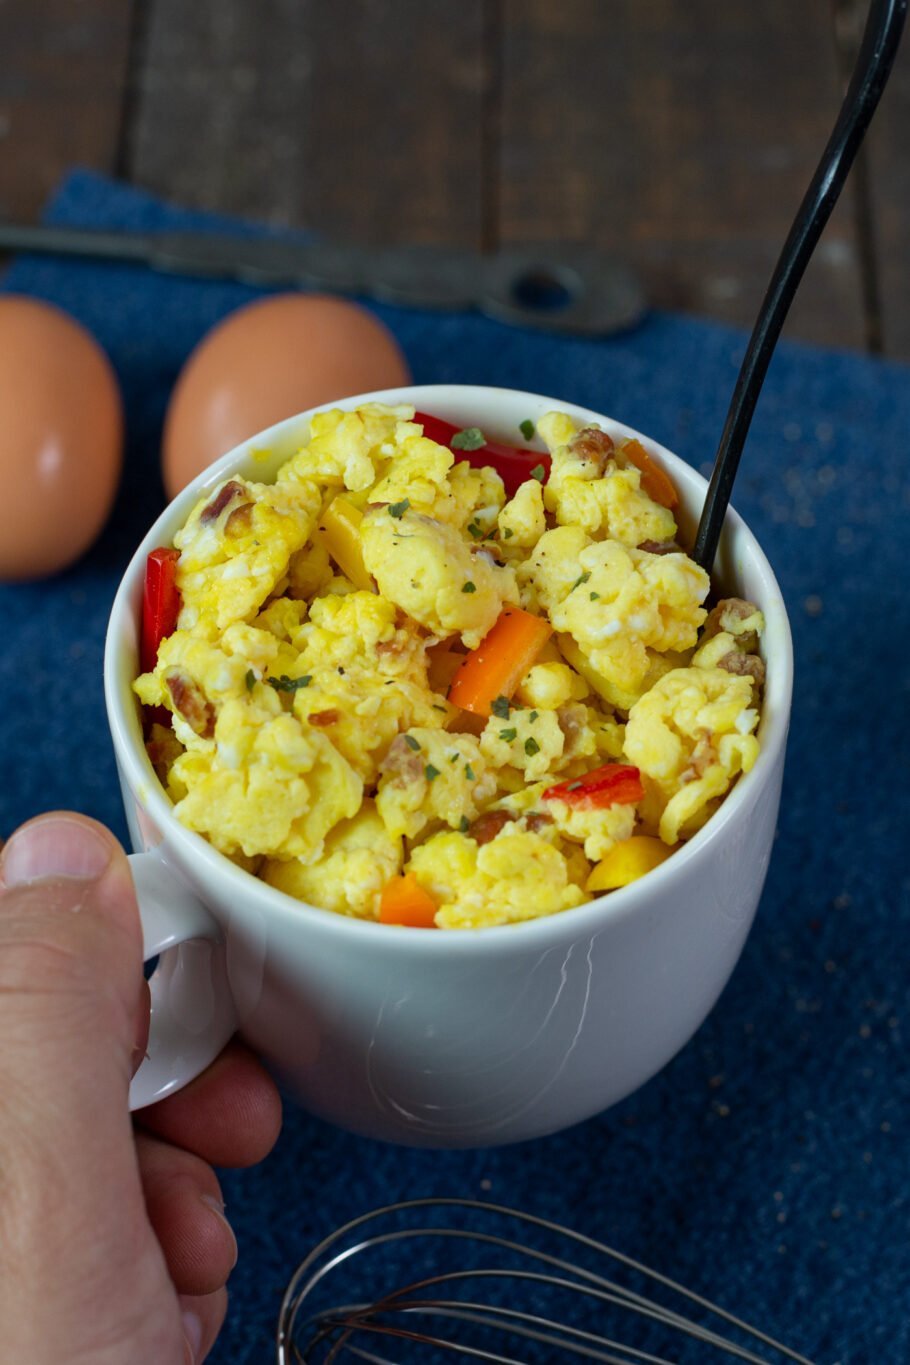 https://media.theproteinchef.co/wp-content/uploads/2020/08/Microwave-Scrambled-Eggs-in-a-Mug-Holding-910x1365.jpg